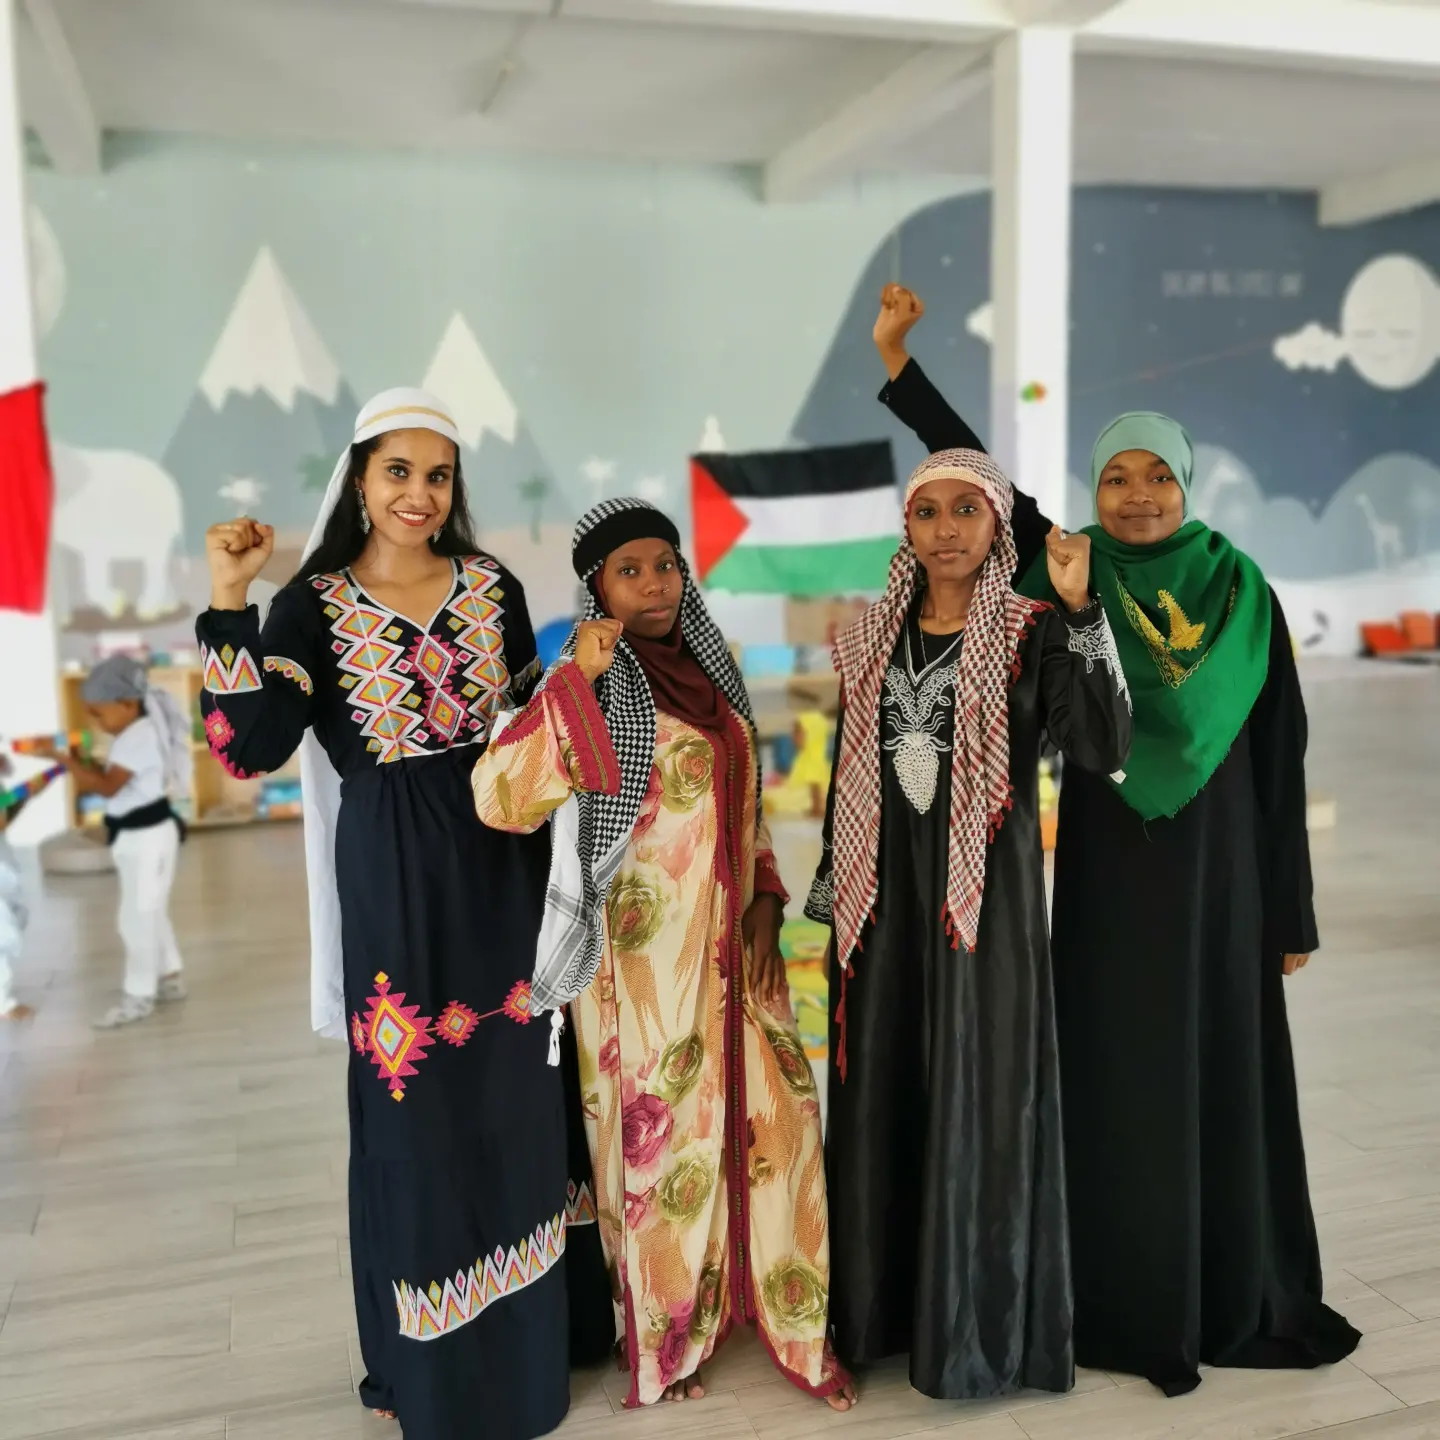 The co-founder & head of school empowering Palestine with our teachers